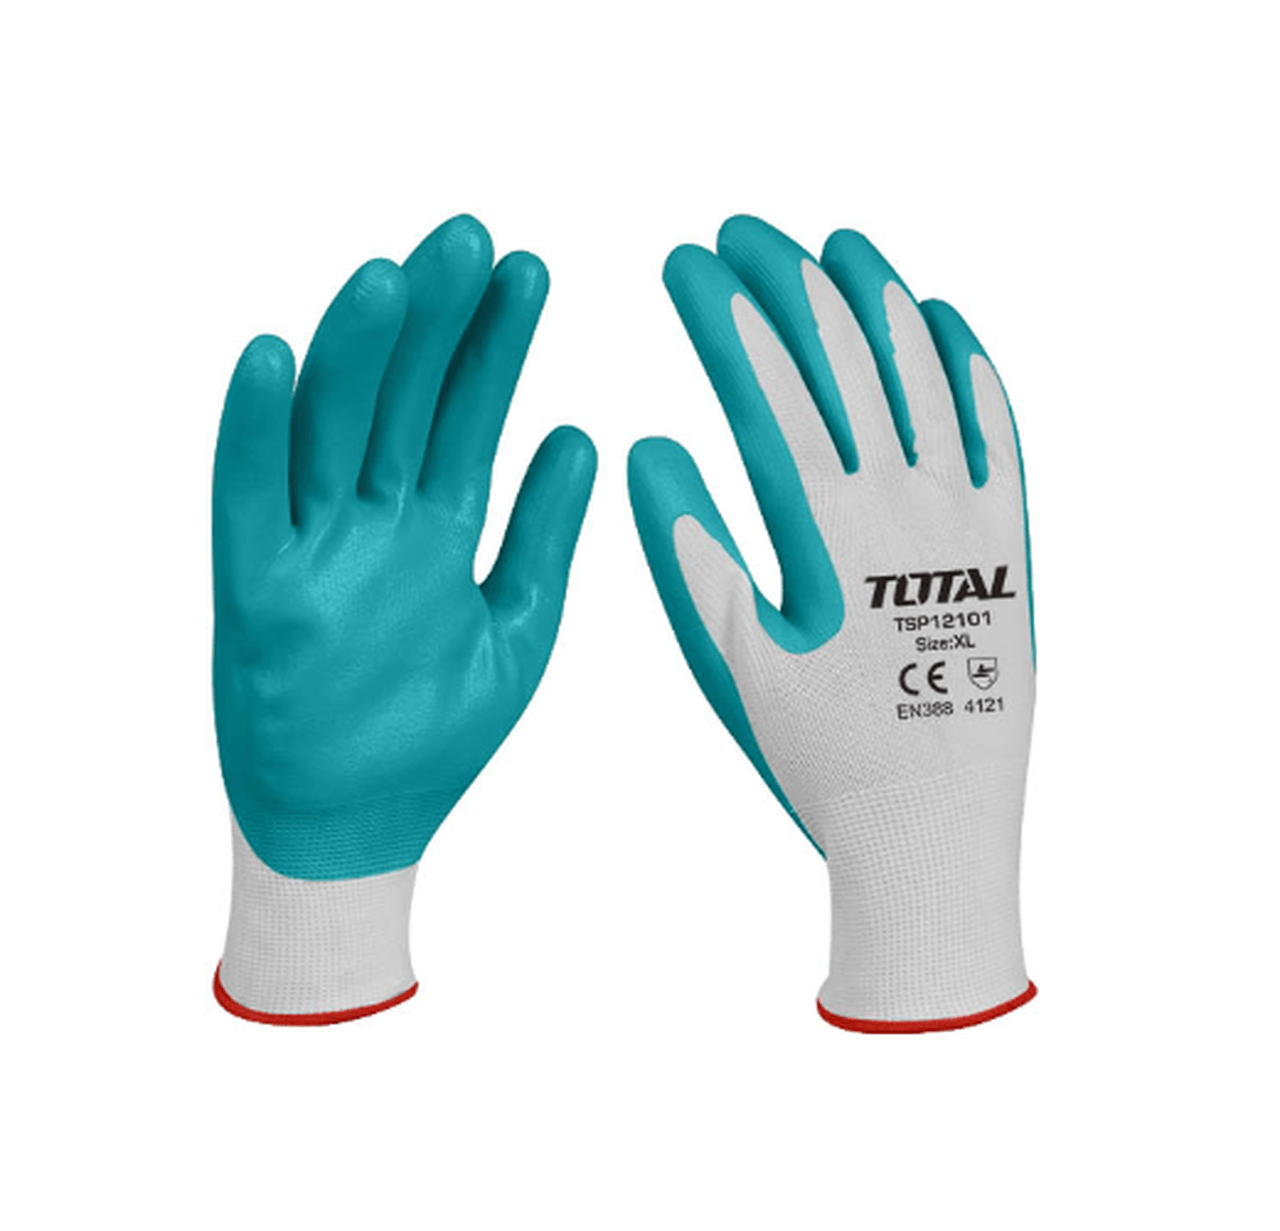 Total Nitrile Glove - TSP12101 | Supply Master | Accra, Ghana Tools Building Steel Engineering Hardware tool